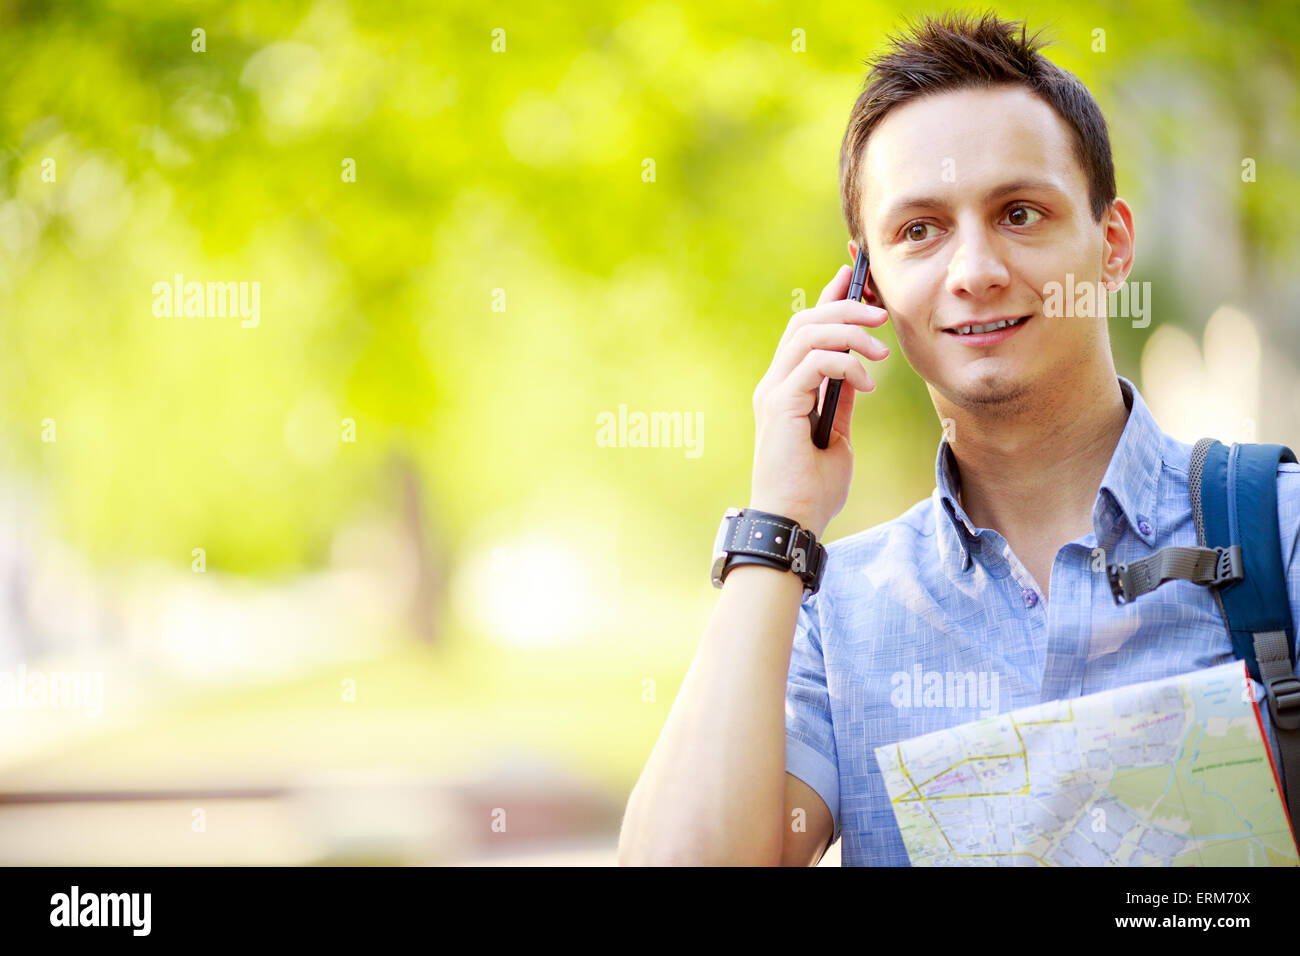 Man holding map outdoors and talking by phone Stock Photo